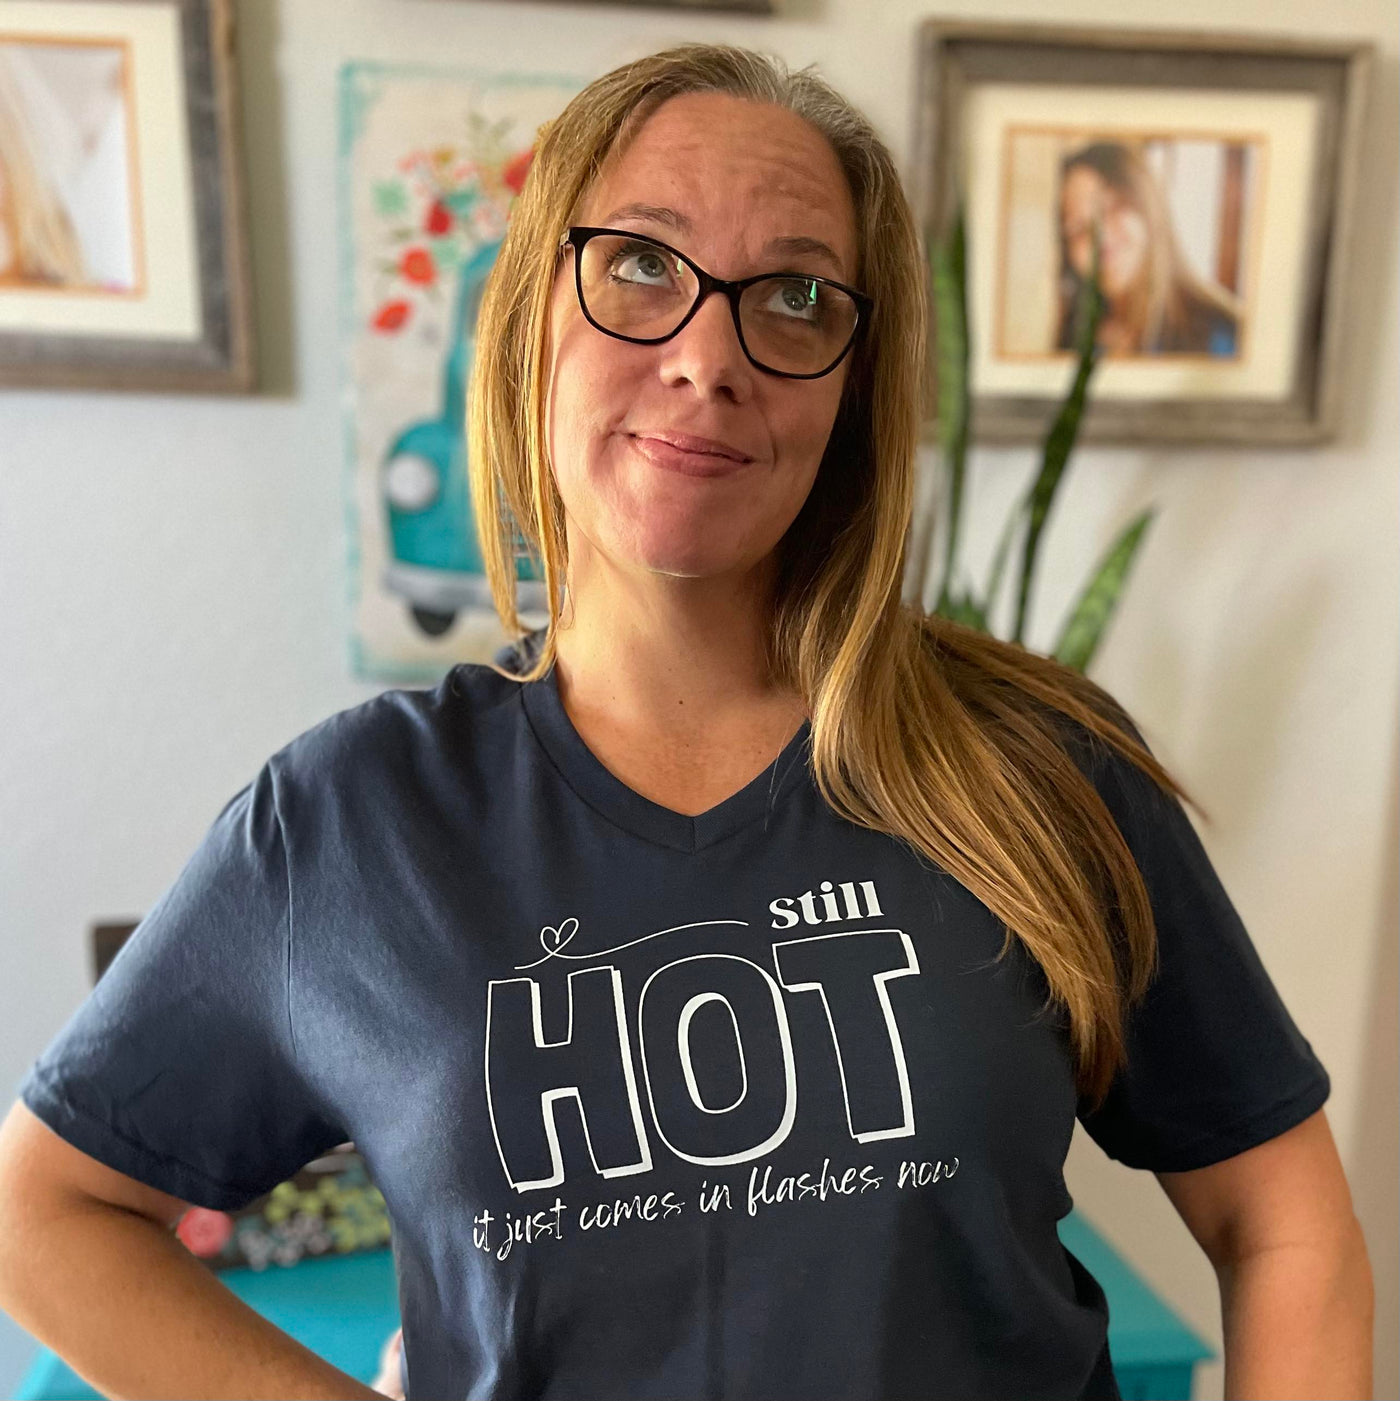 "Still Hot - It Just Comes in Waves Now" Menopause Graphic Tee